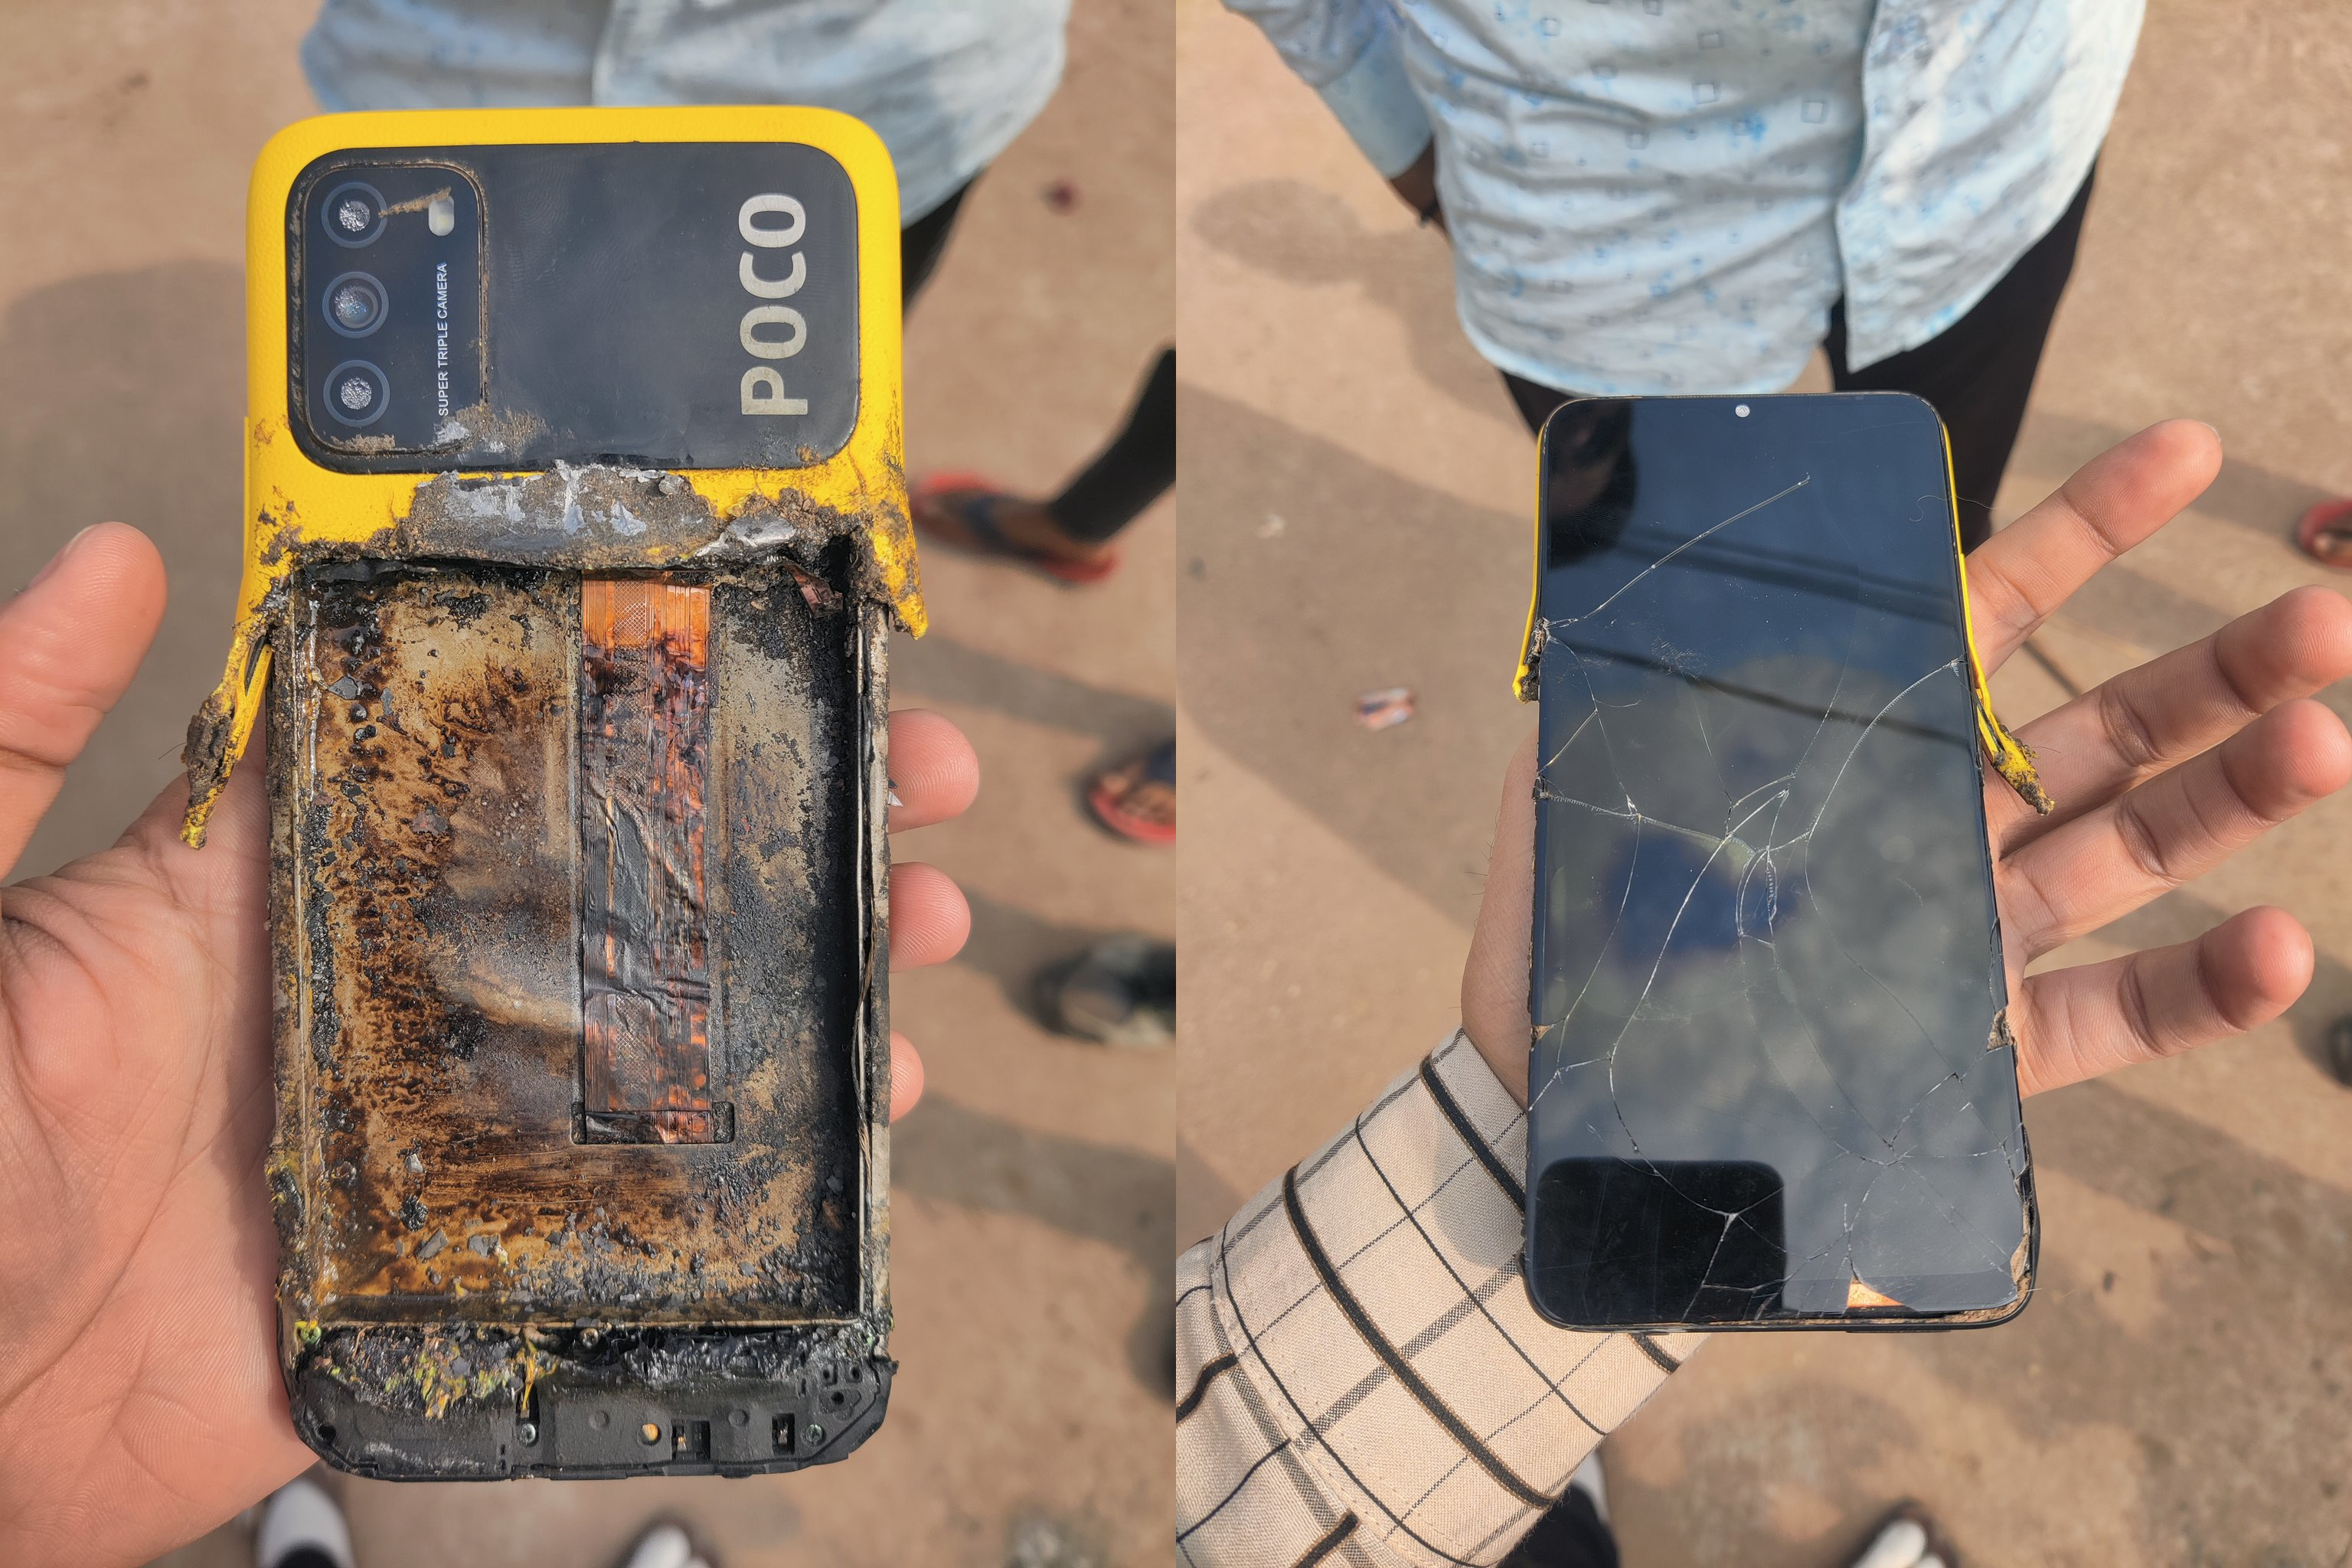 "This is the worst service and quality test": another Xiaomi sub-brand smartphone exploded - Poco M3